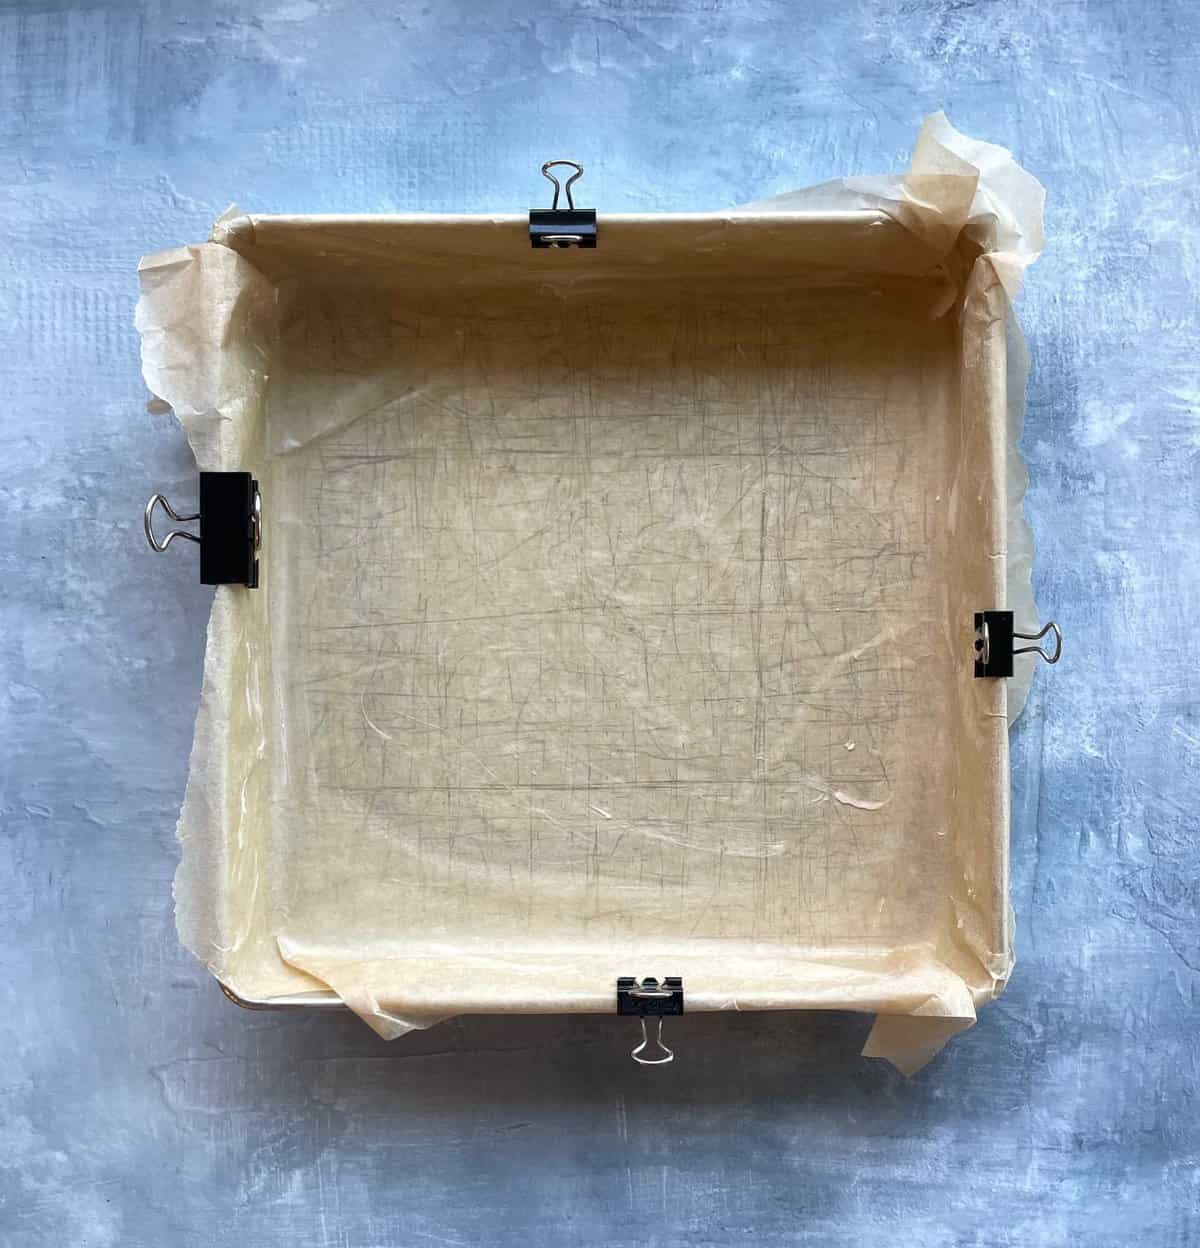 square baking pan lined with parchment paper secured with binder clips.